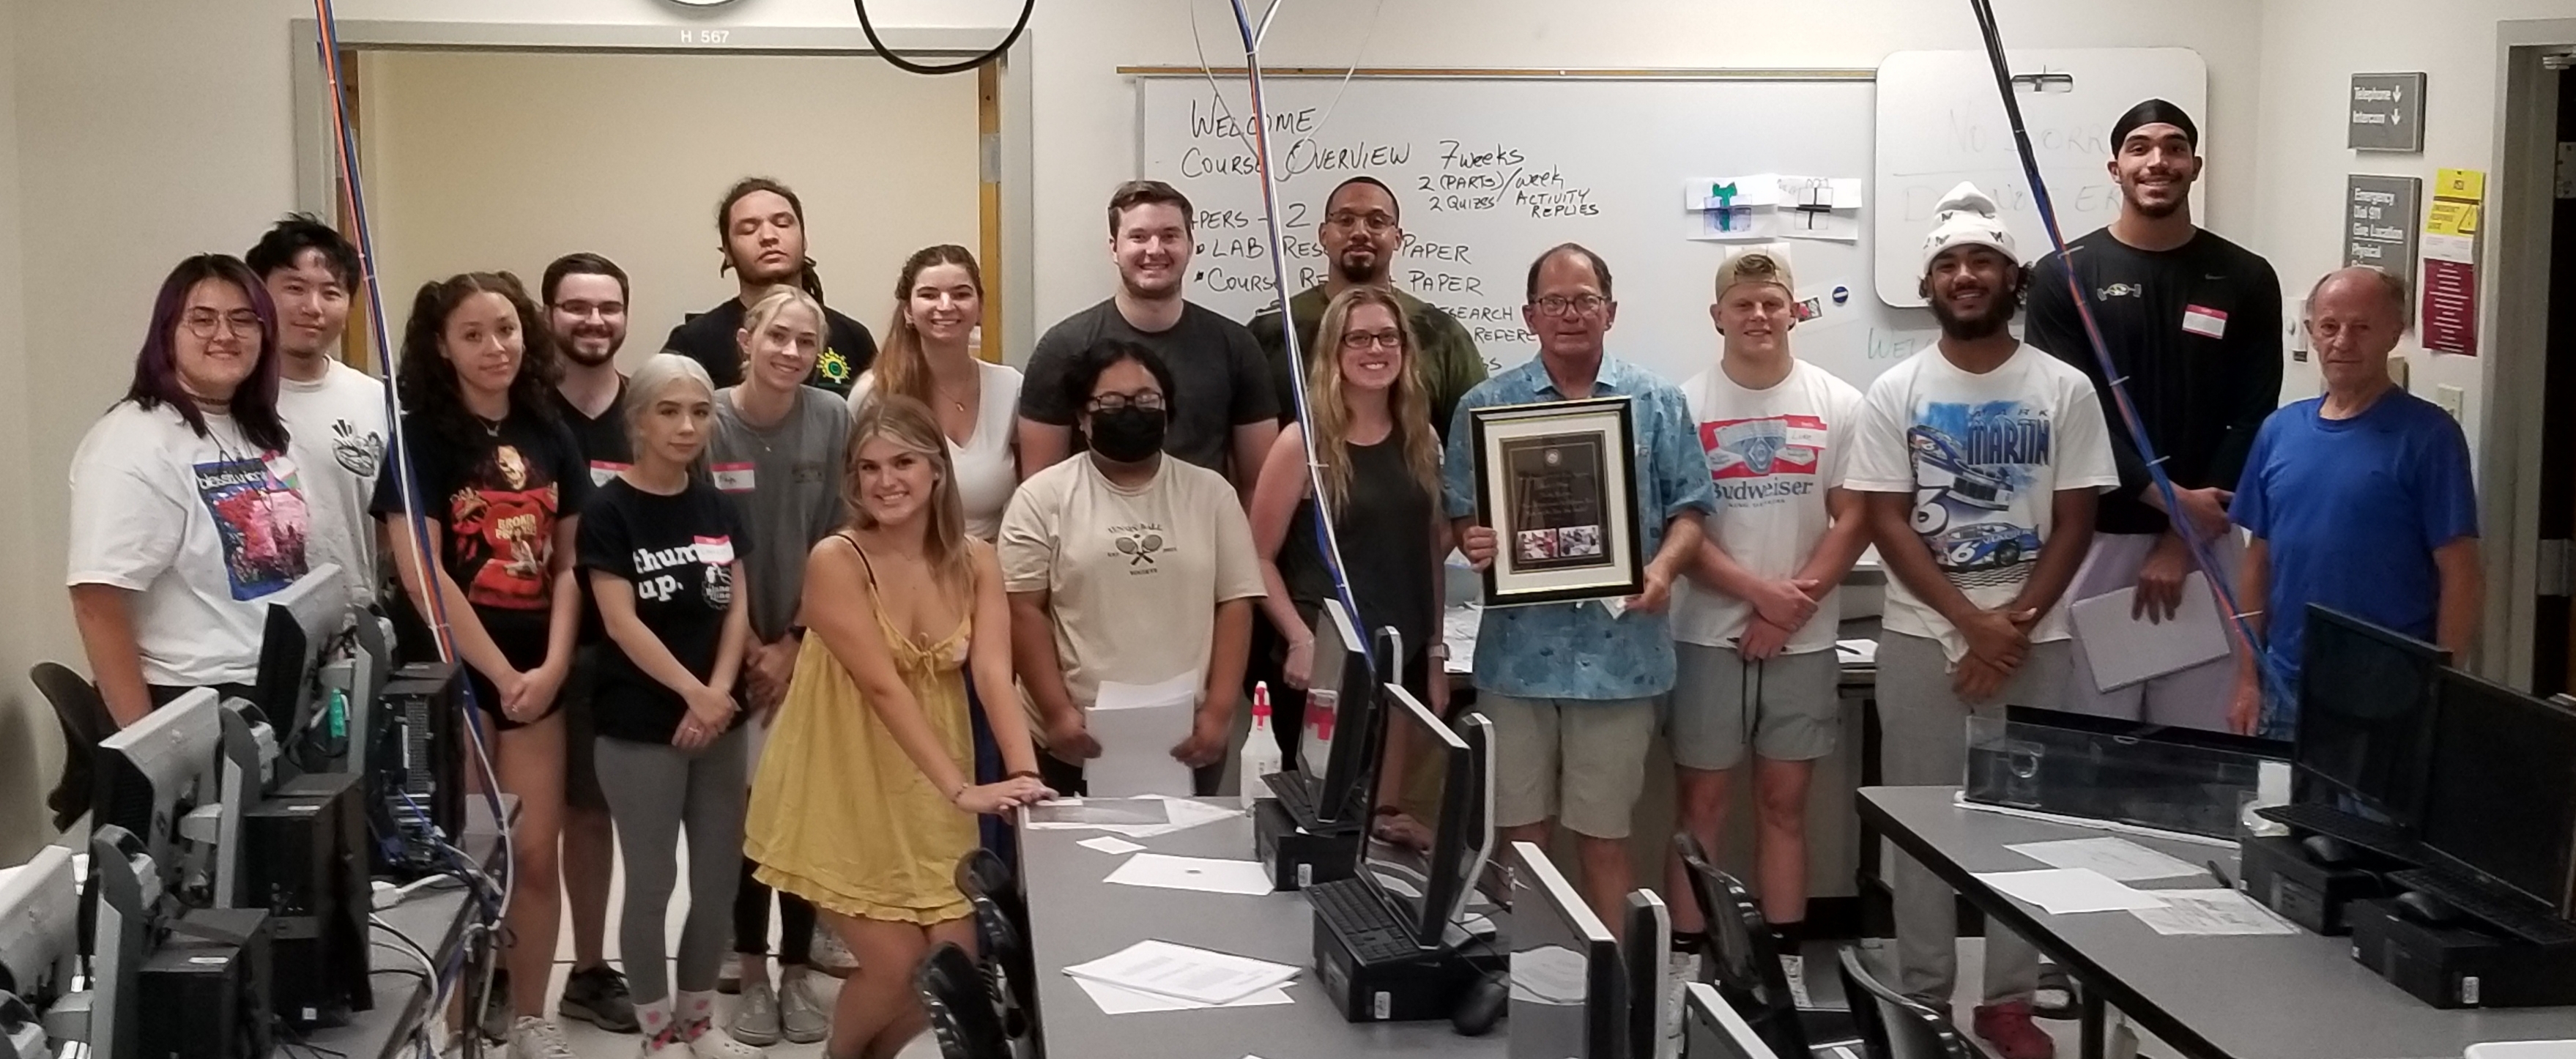 Professor Frank Mayer's last day in the Patterns and Nature lab in Spring 2022.